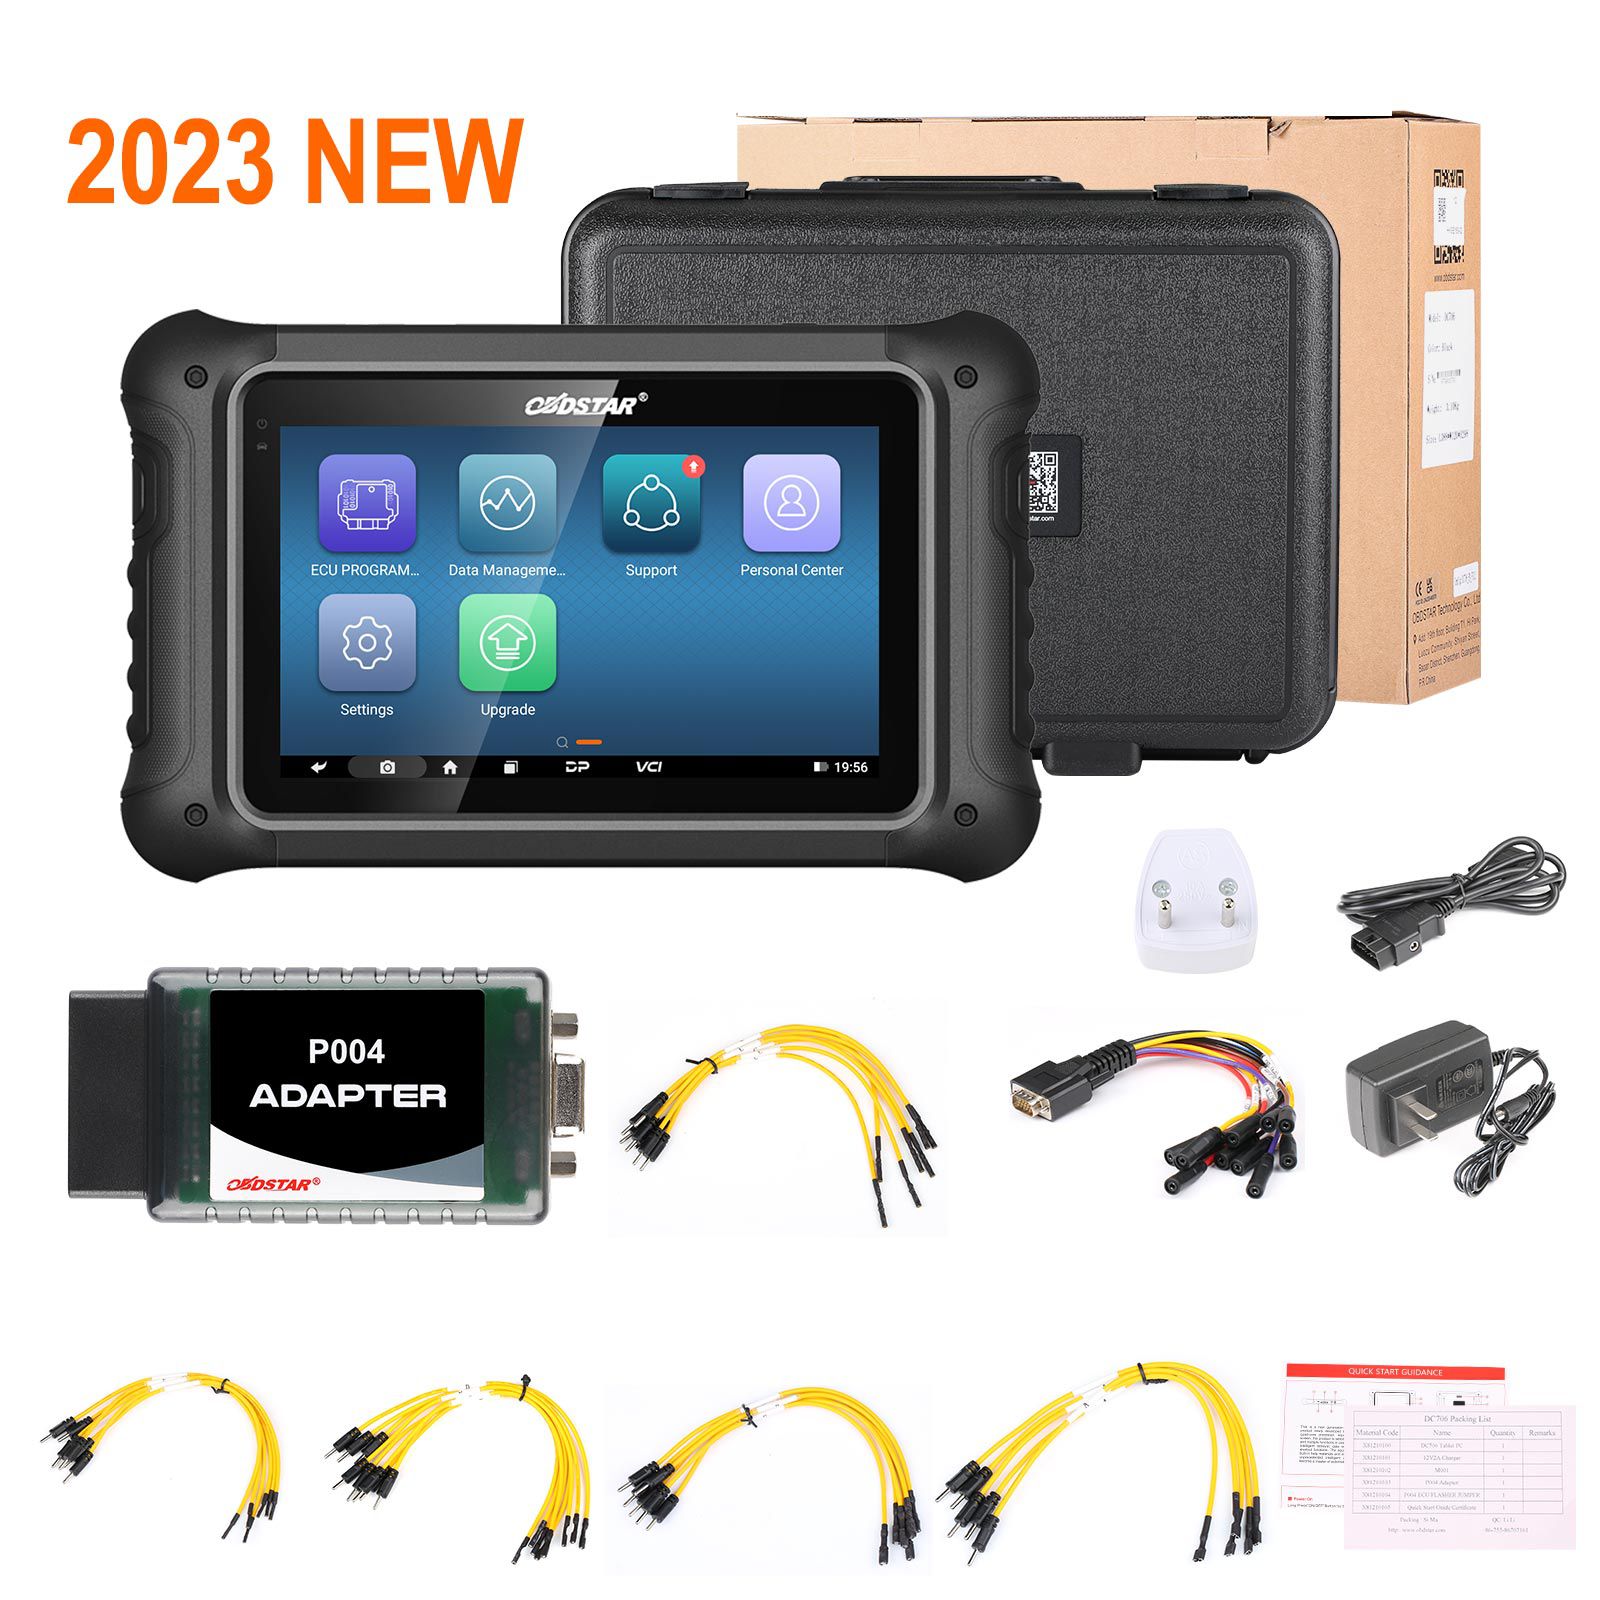 OBDSTAR DC706 ECU Tool Full Version Plus P003 Adapter and ECU Bench Cables for Reading BOSCH ECU Data CS PINCODE ECU Clone/ All by OBD or Bench